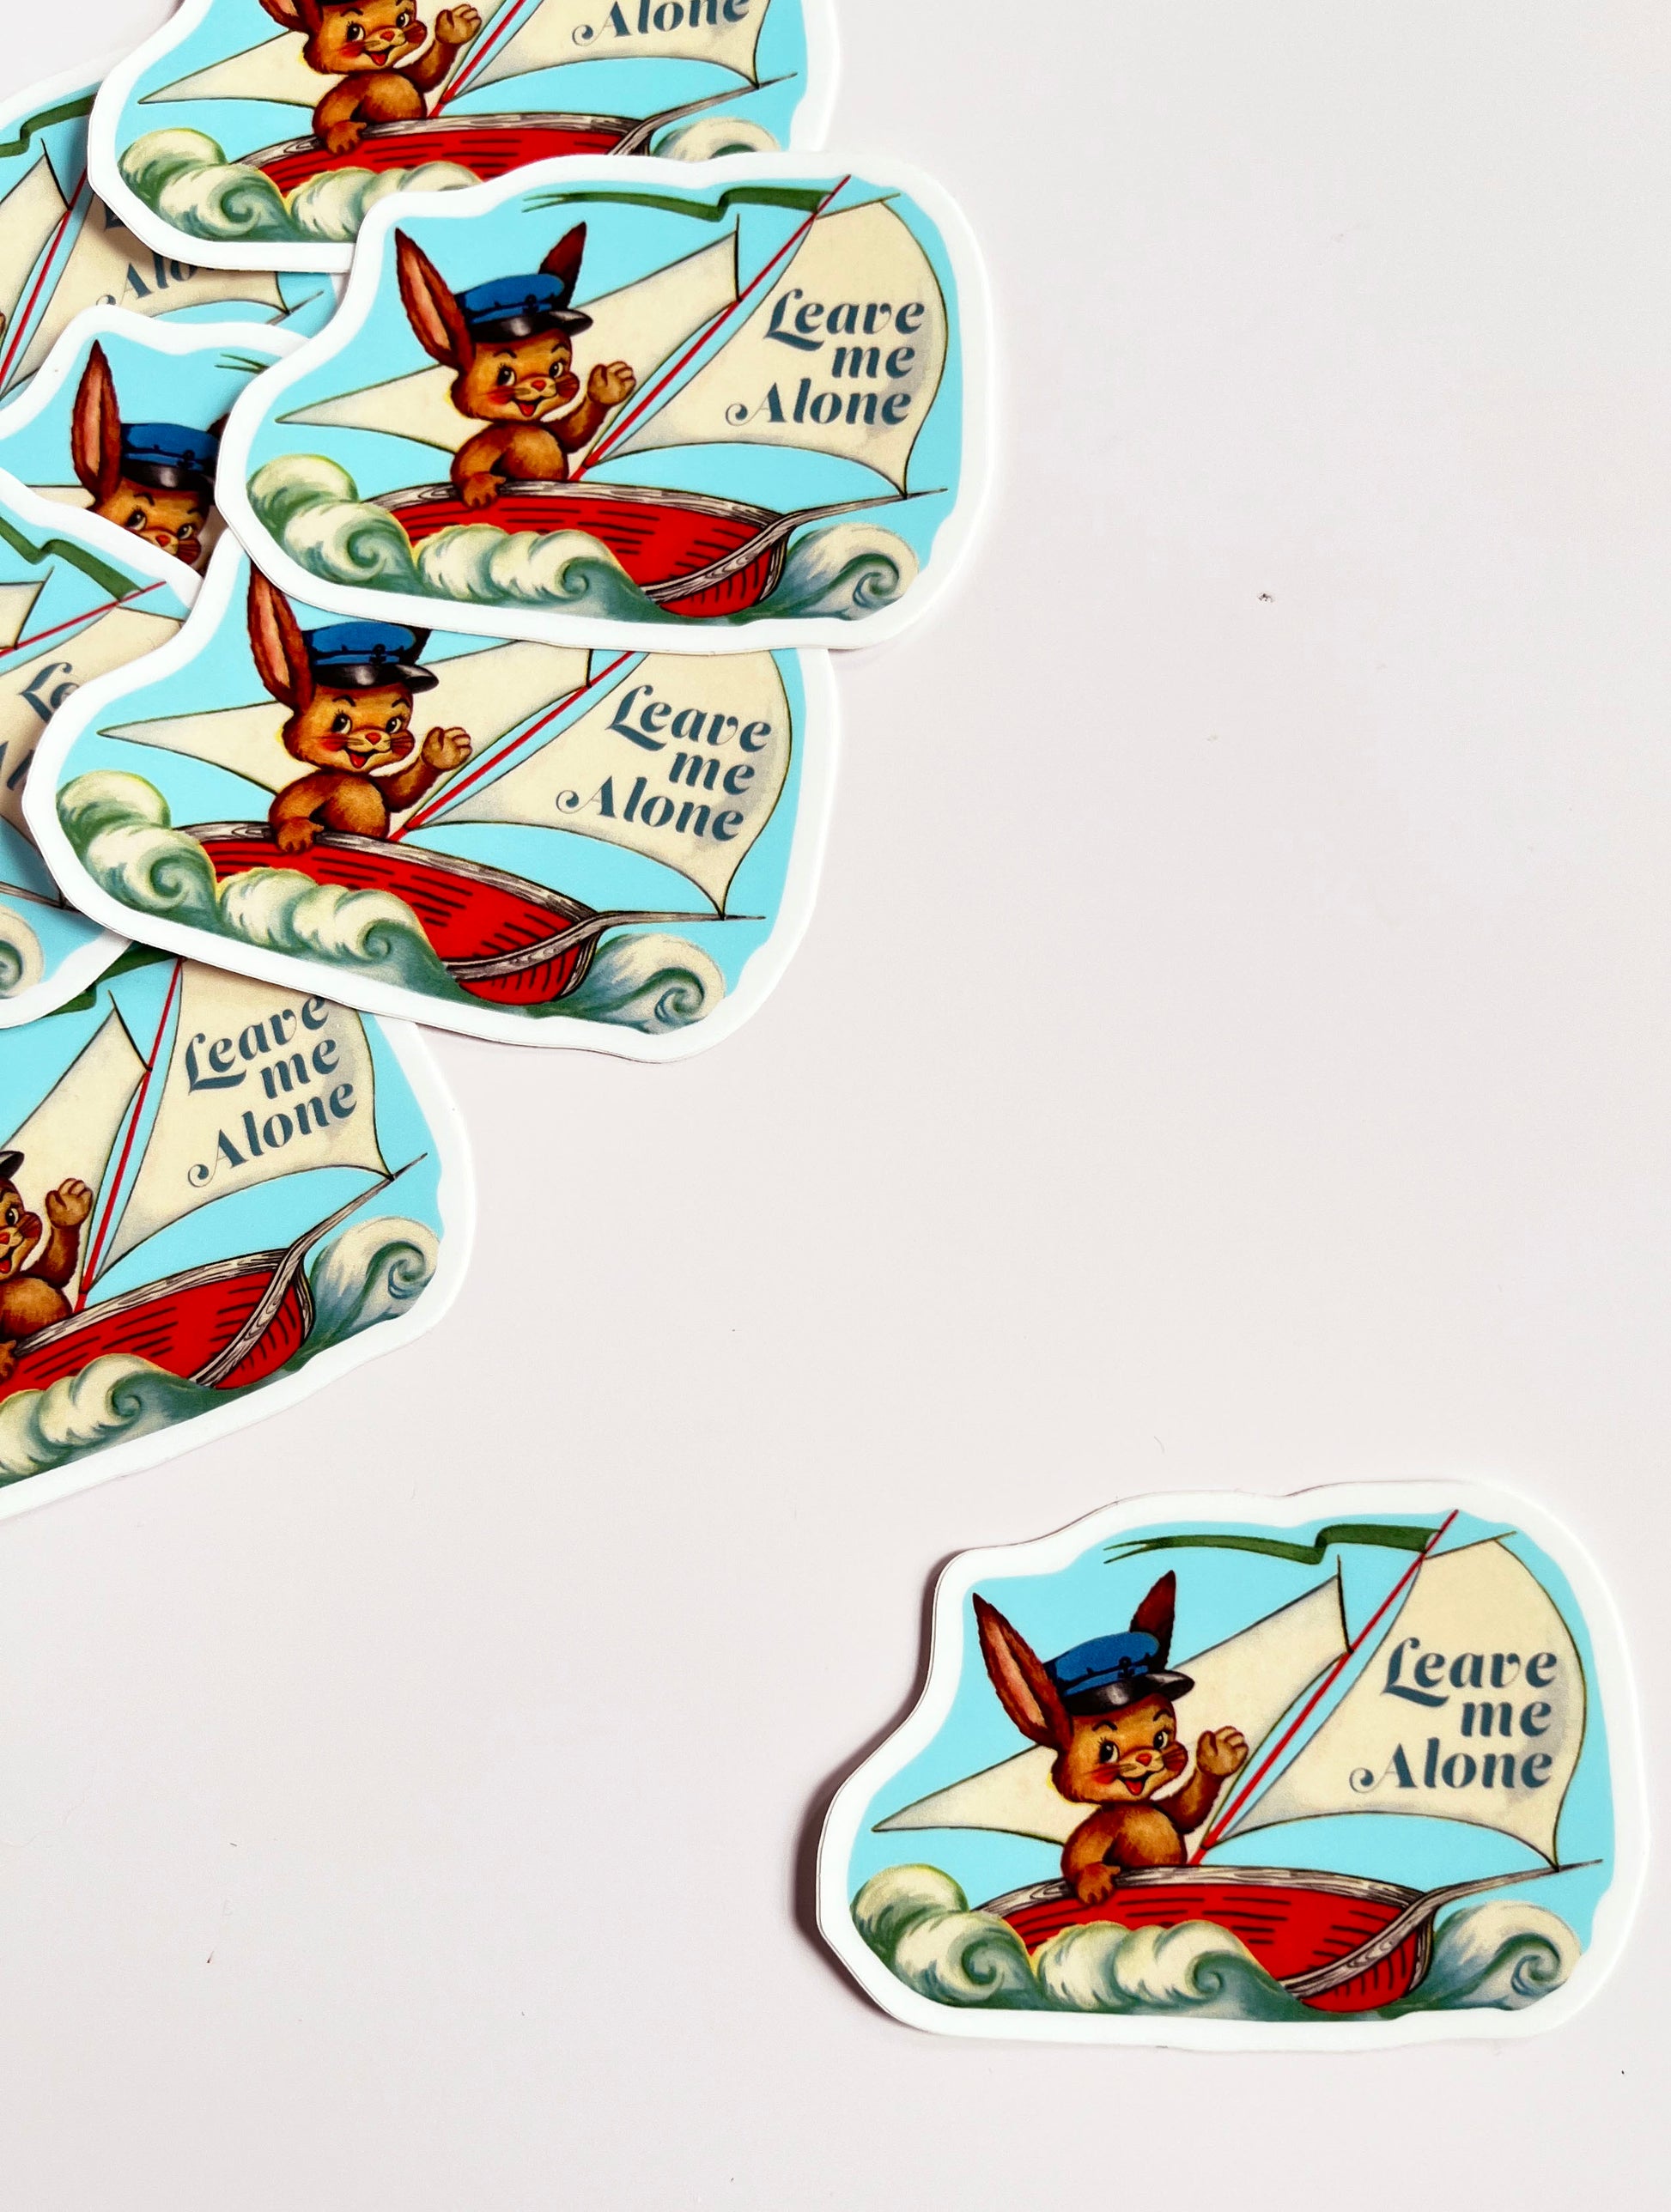 sticker bunny sailor in boat says leave me alone blue red funny snarky vintage stickers coin laundry montana